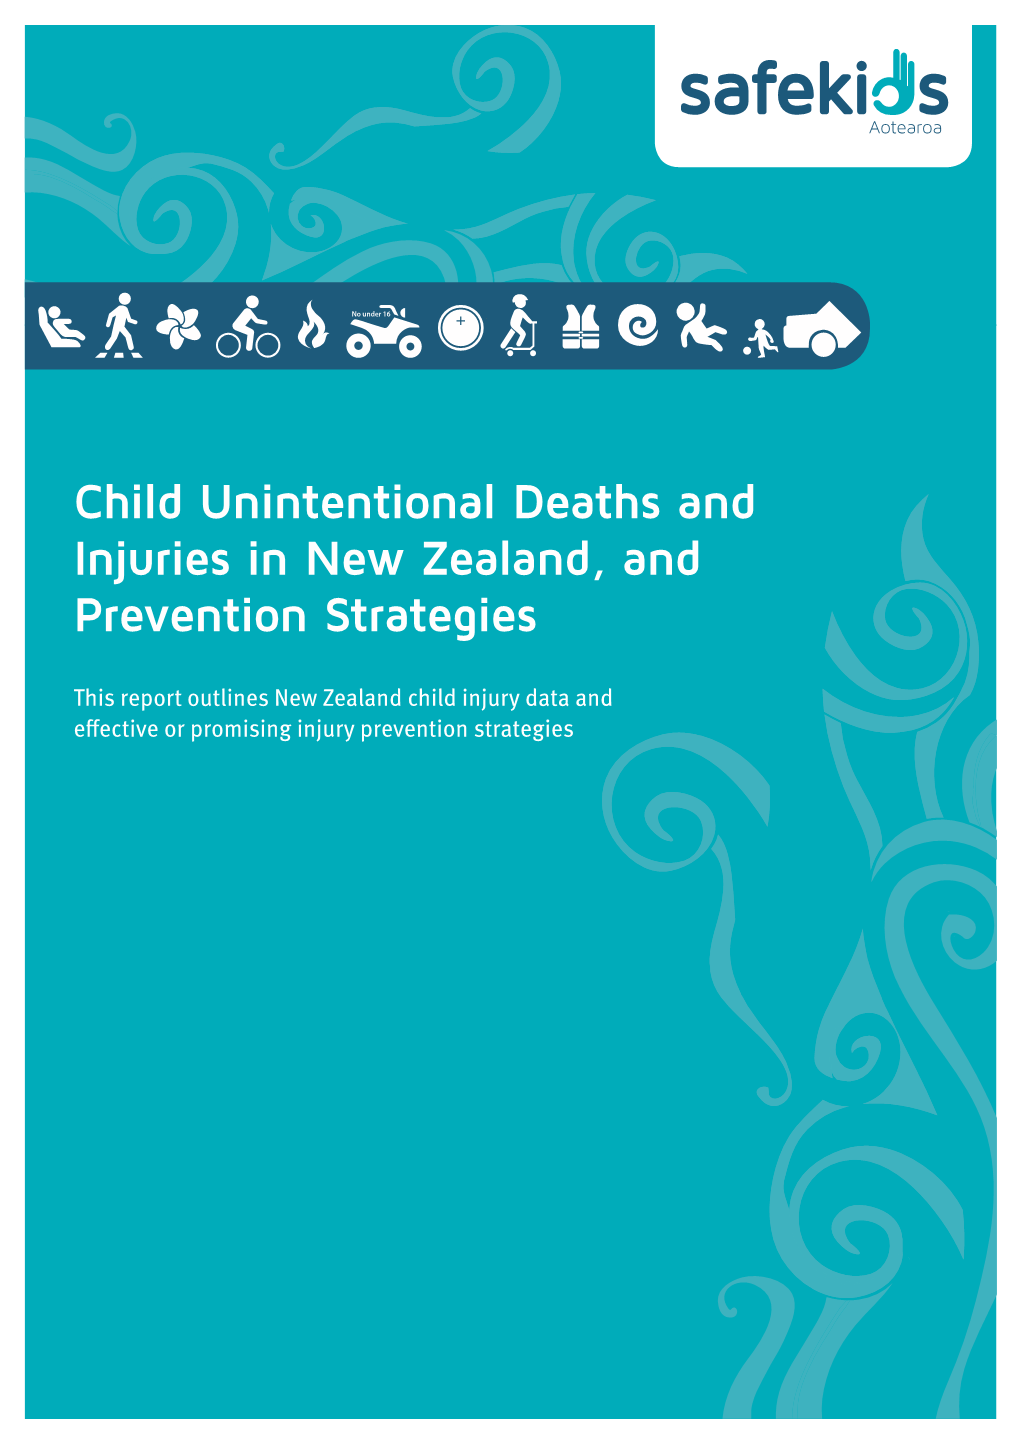 Child Unintentional Deaths and Injuries in New Zealand, and Prevention Strategies